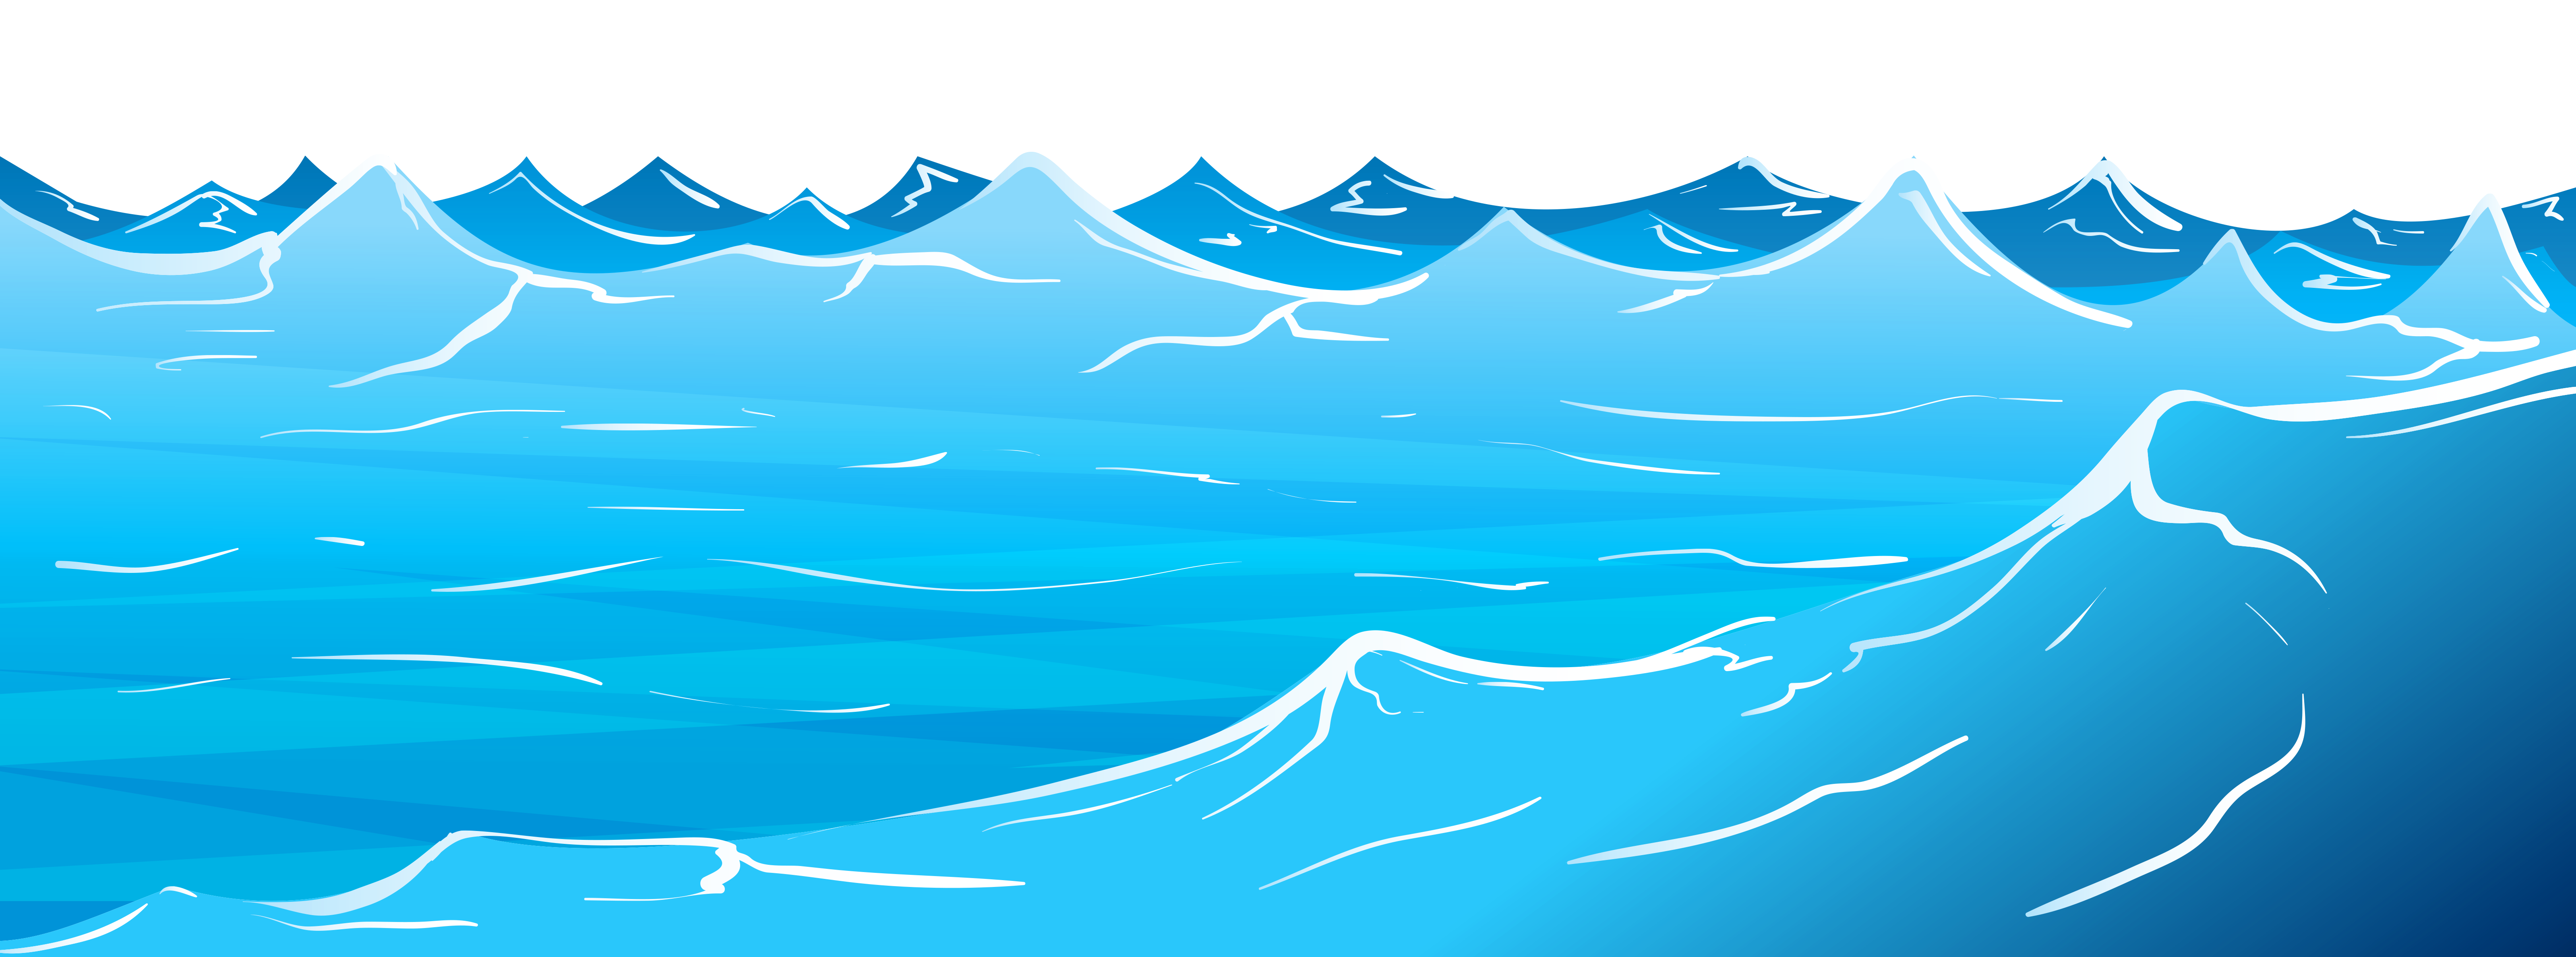 water clipart png - photo #37